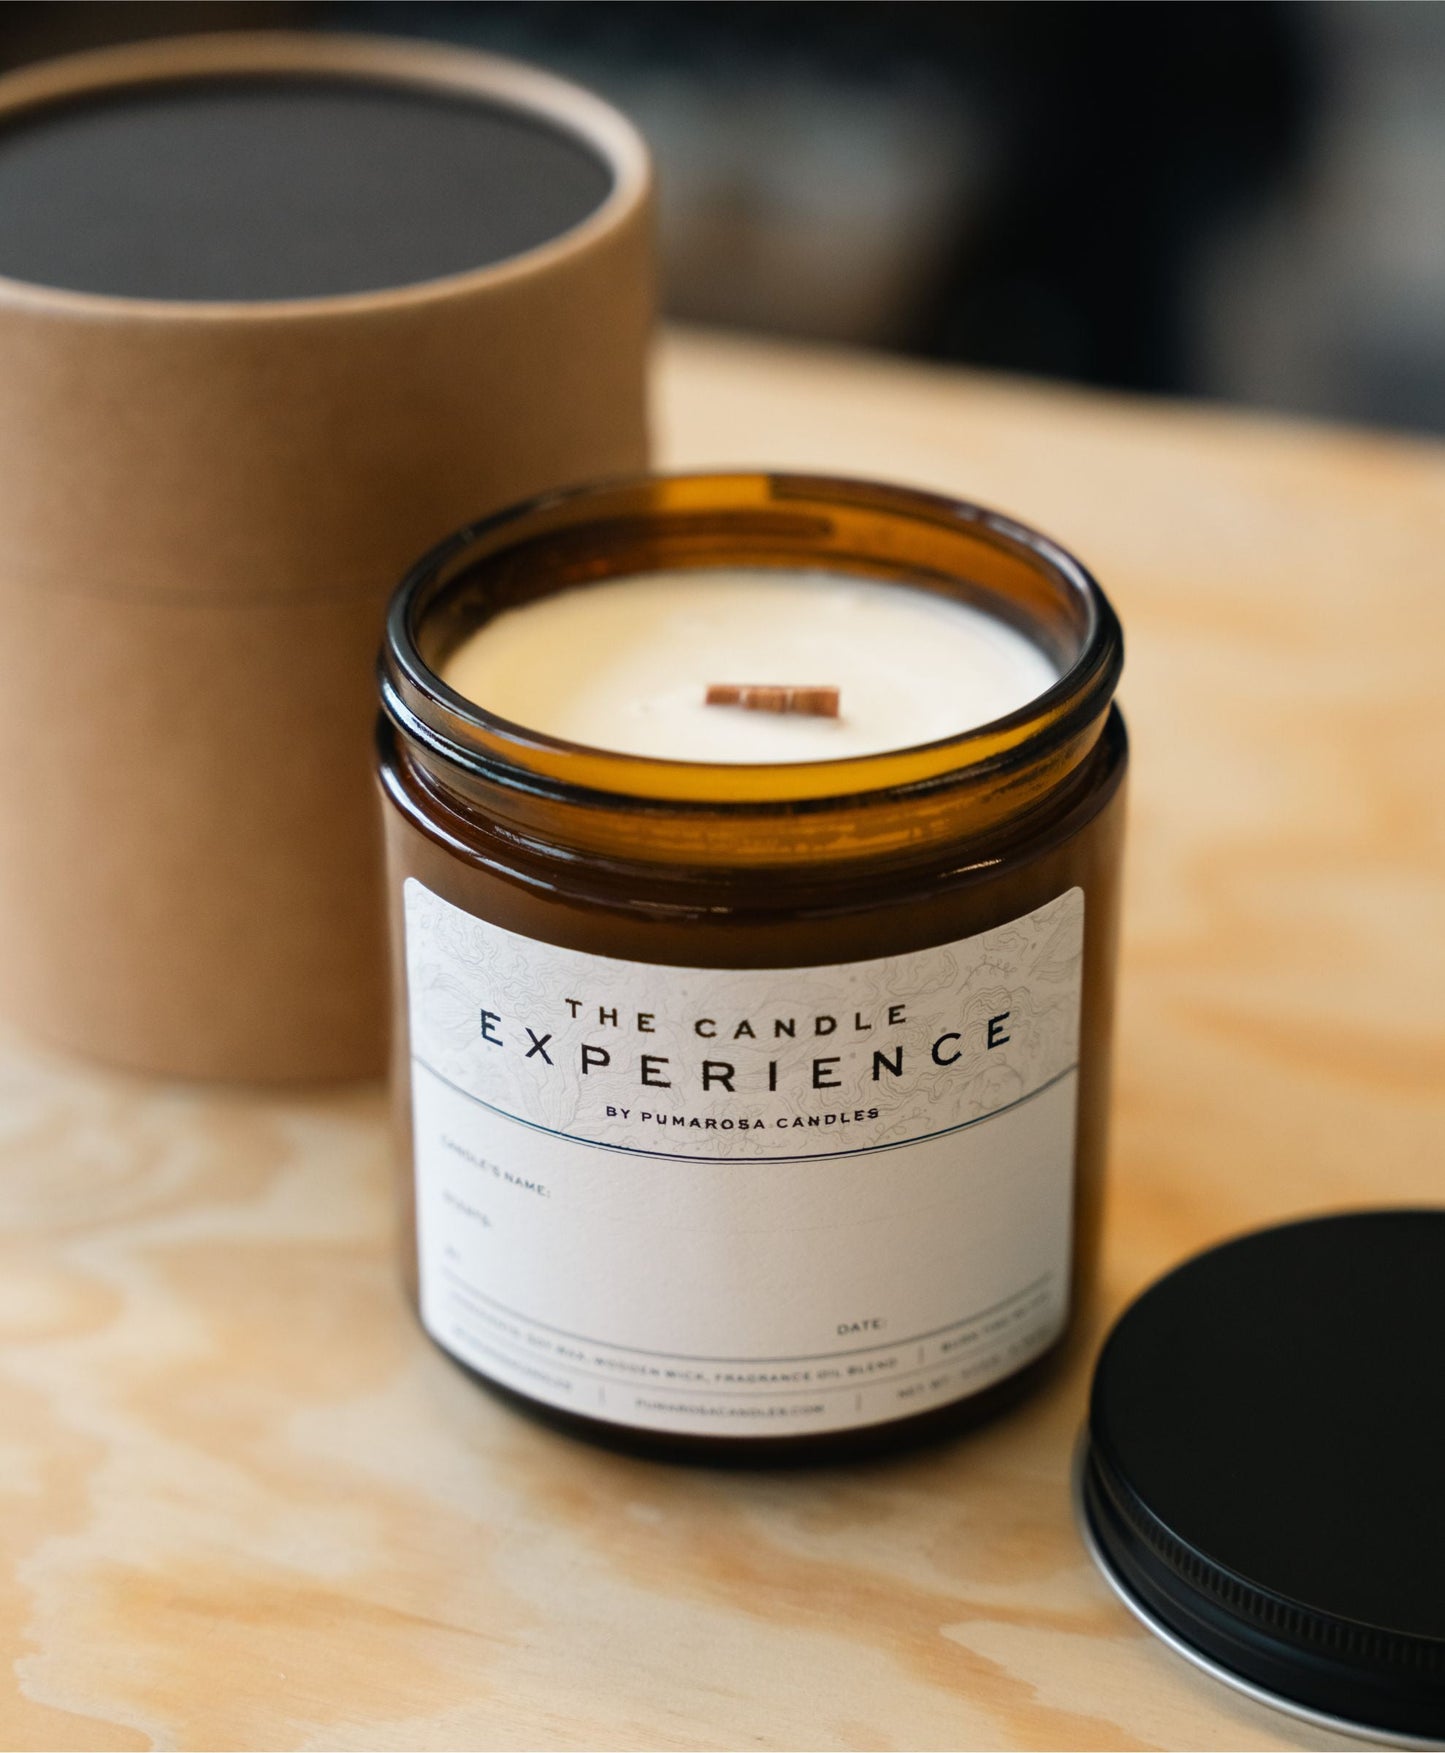 Candle-Making Experience: March, 10th at 2pm